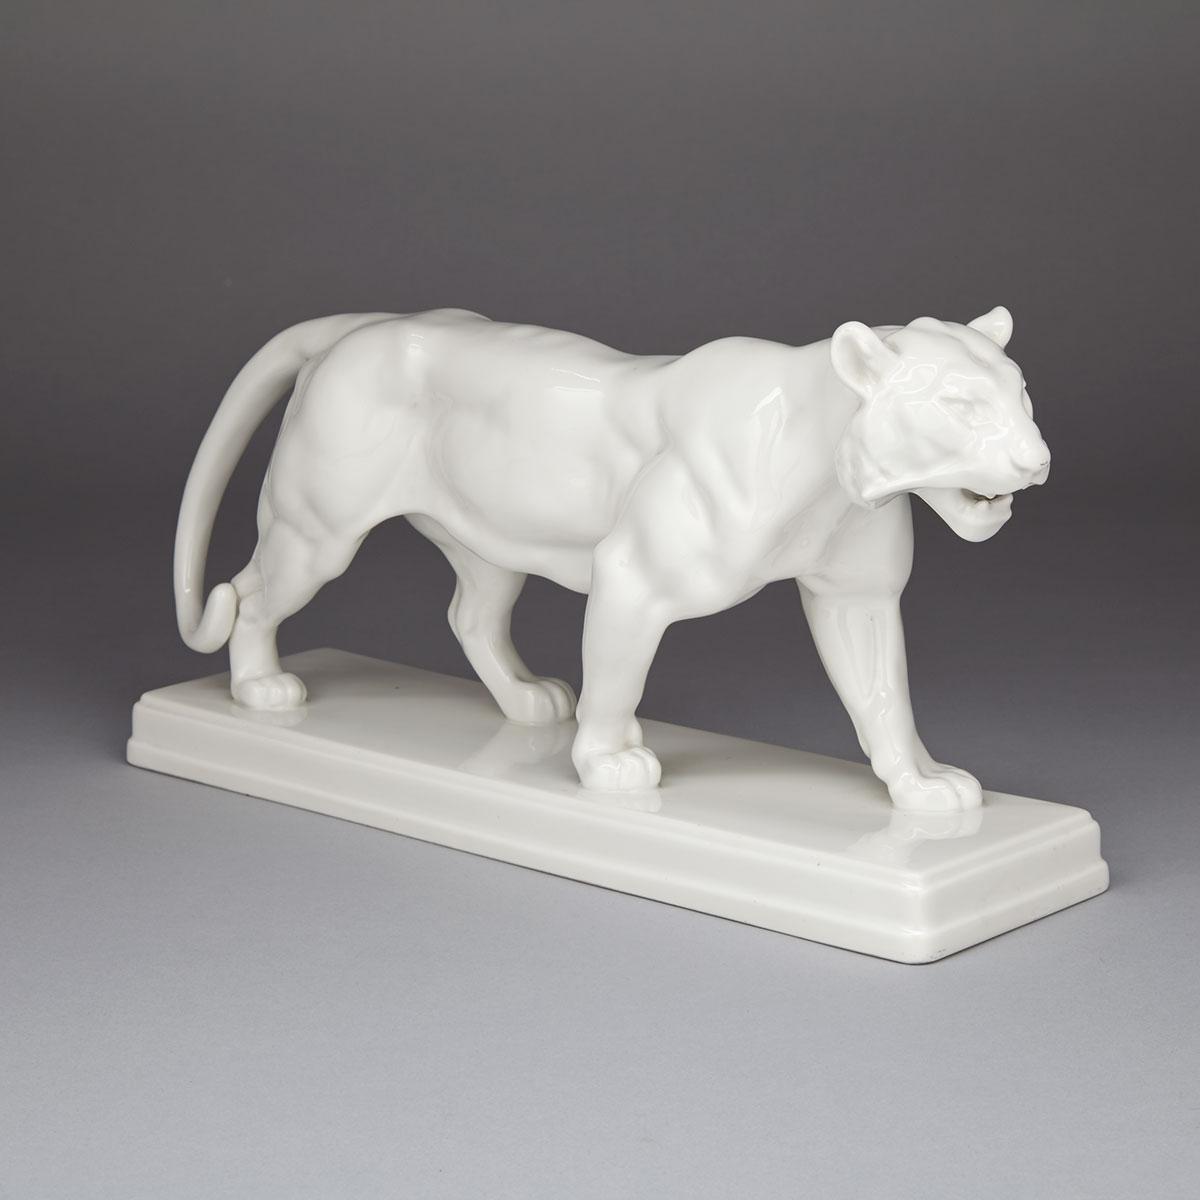 Berlin White Glazed Model of ‘Tigre Qui Marche’, after Antoine-Louis Barye, 20th century